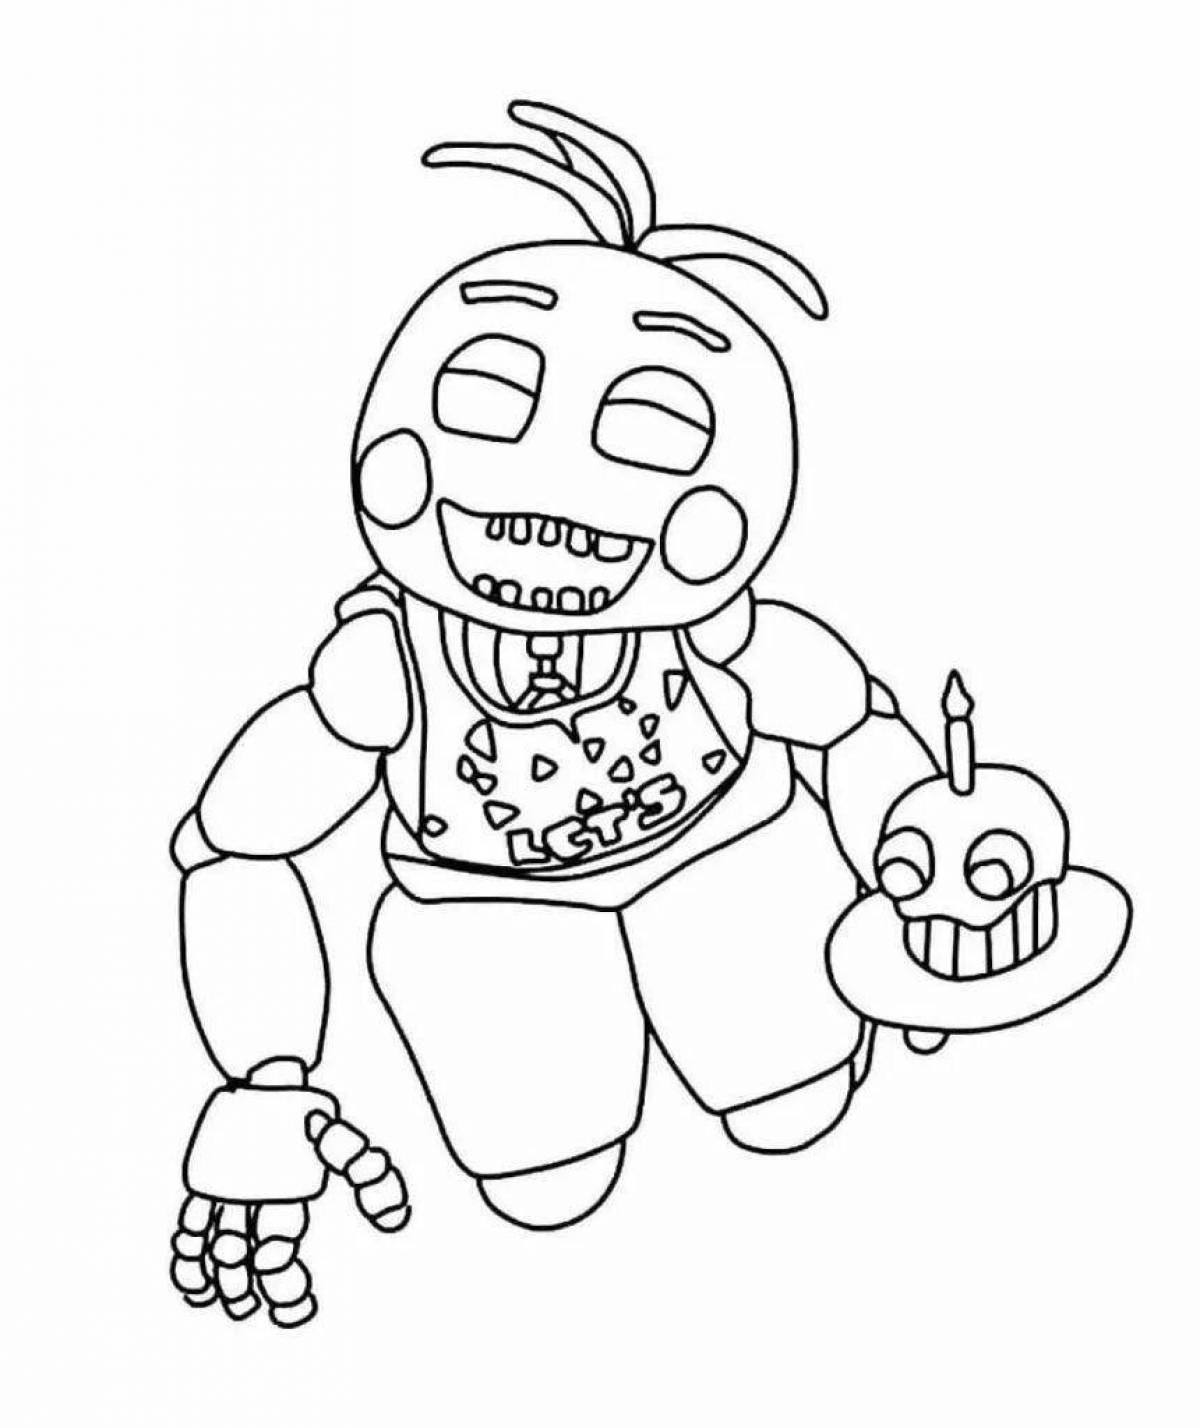 Exciting animatronics coloring book